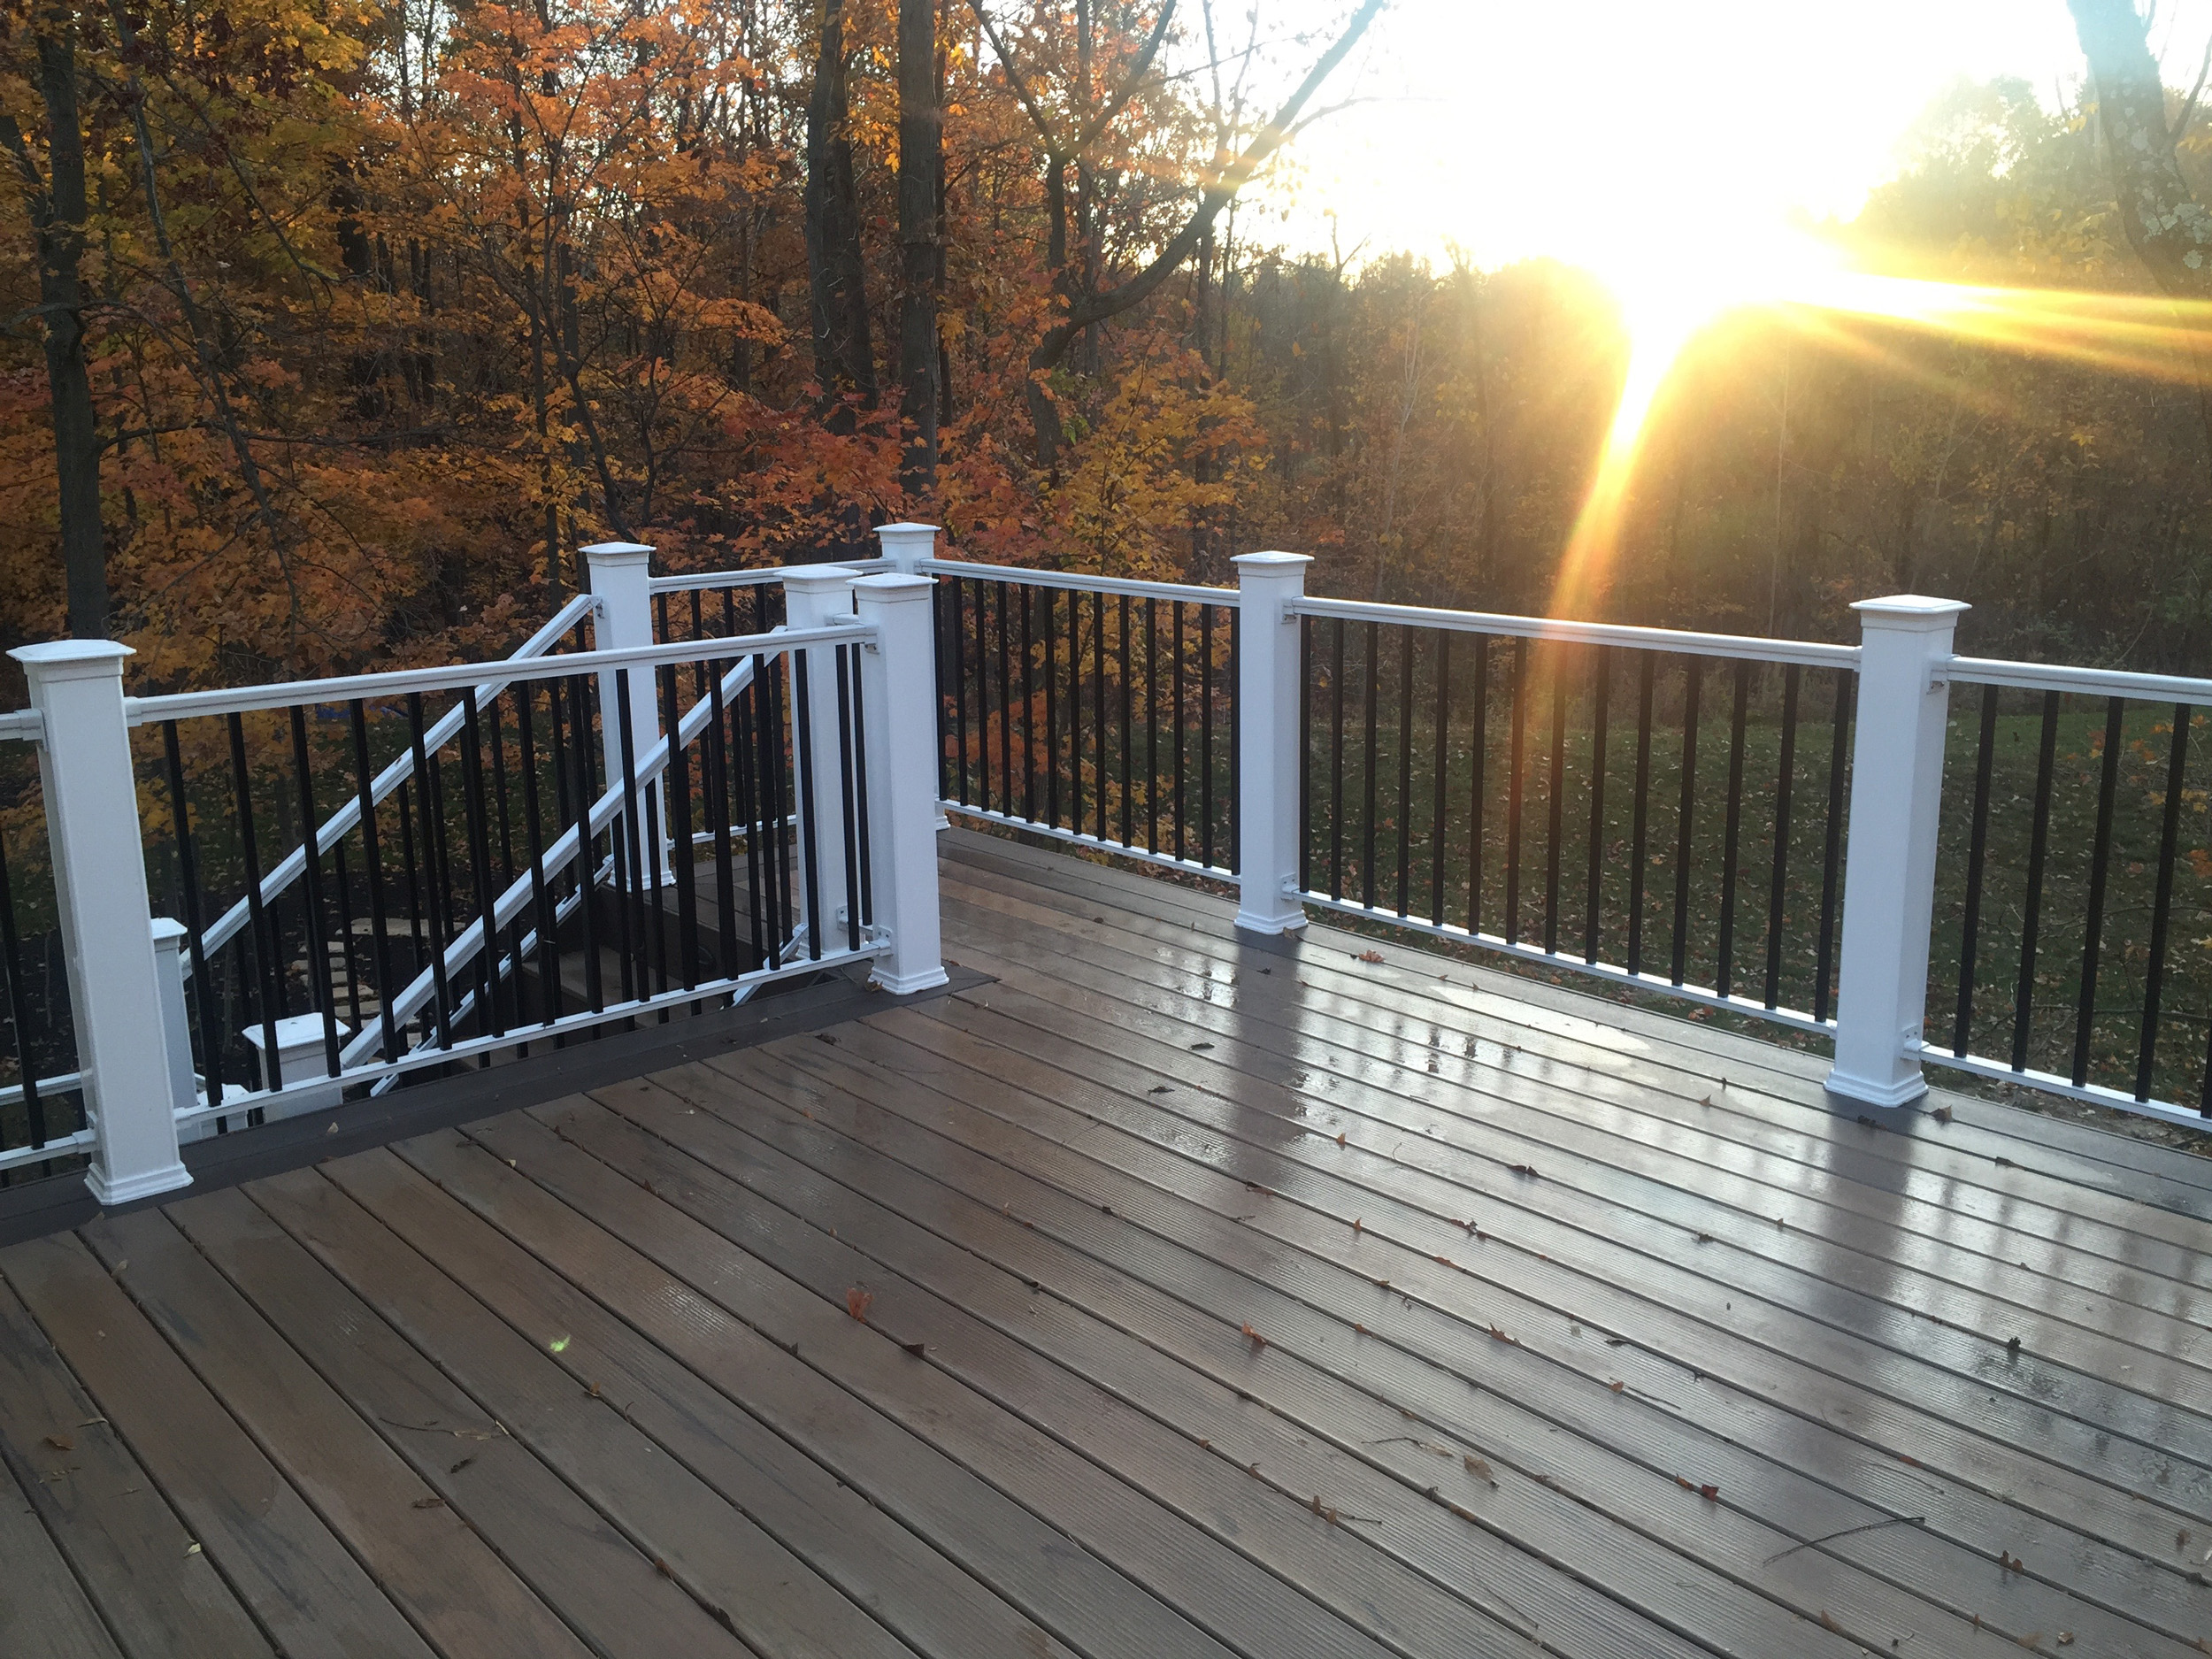 Another job well done by APCO deck builders in Columbus Ohio